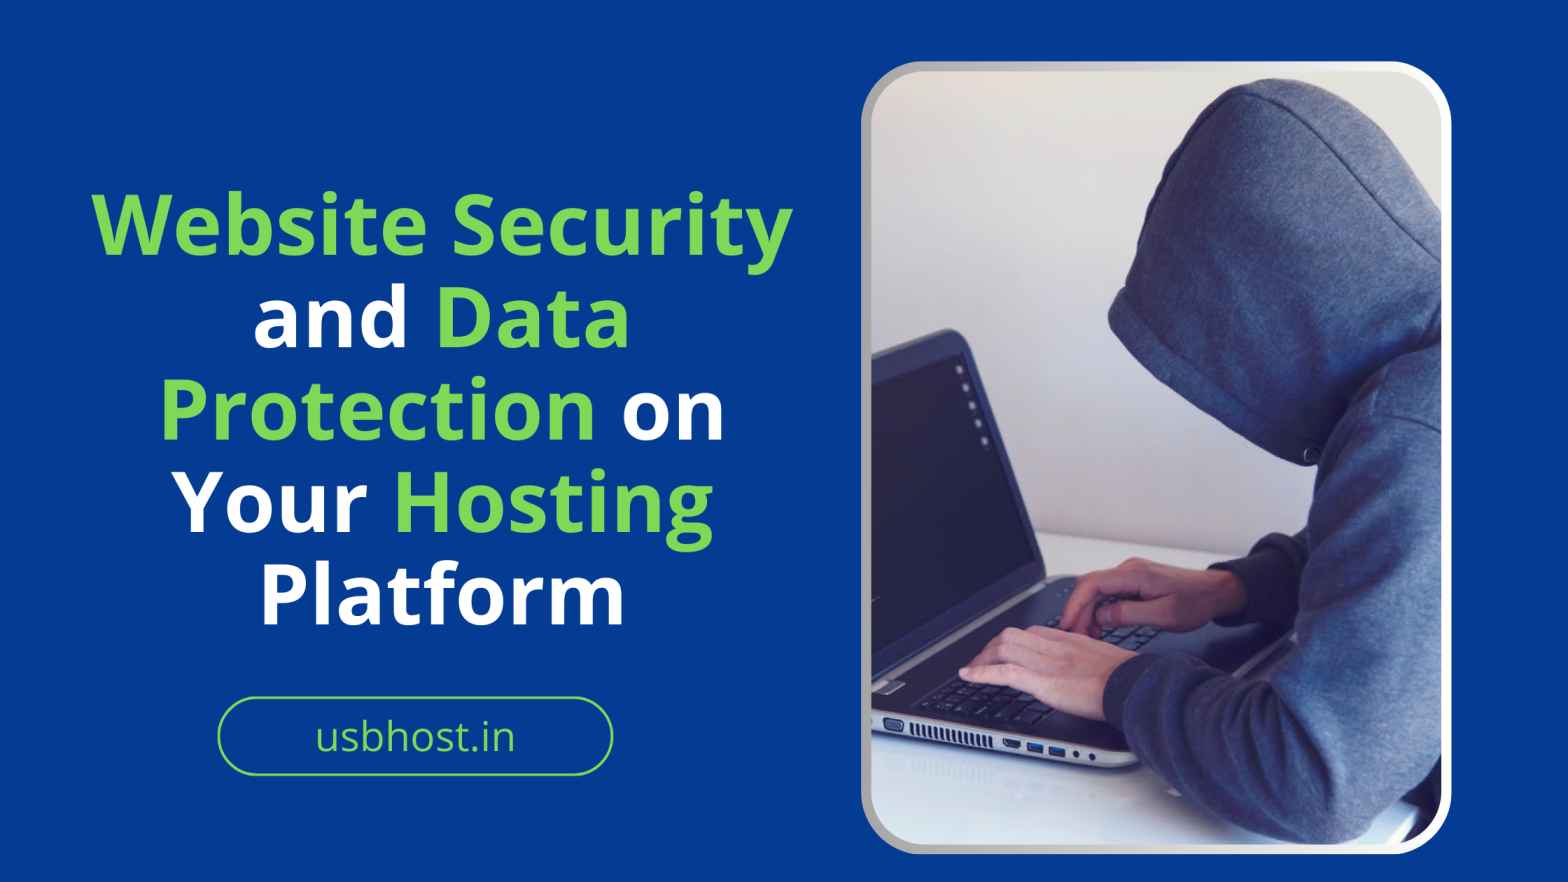 Best-Practices-for-Website-Security-and-Data-Protection-on-Your-Hosting-Platform